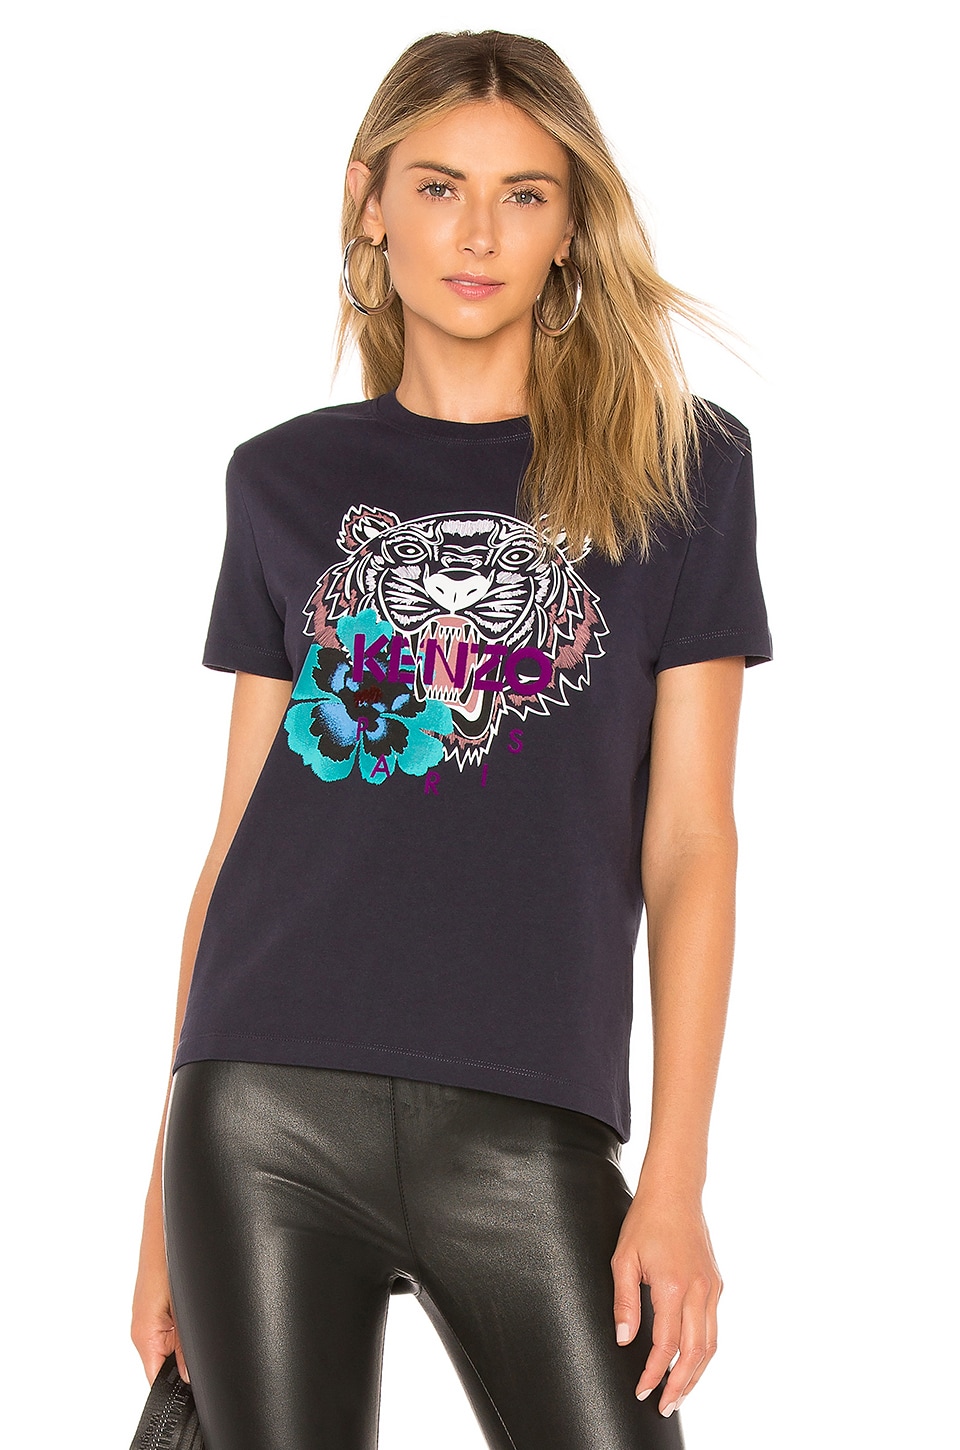 Kenzo Flower Tiger Relax T Shirt in Ink | REVOLVE